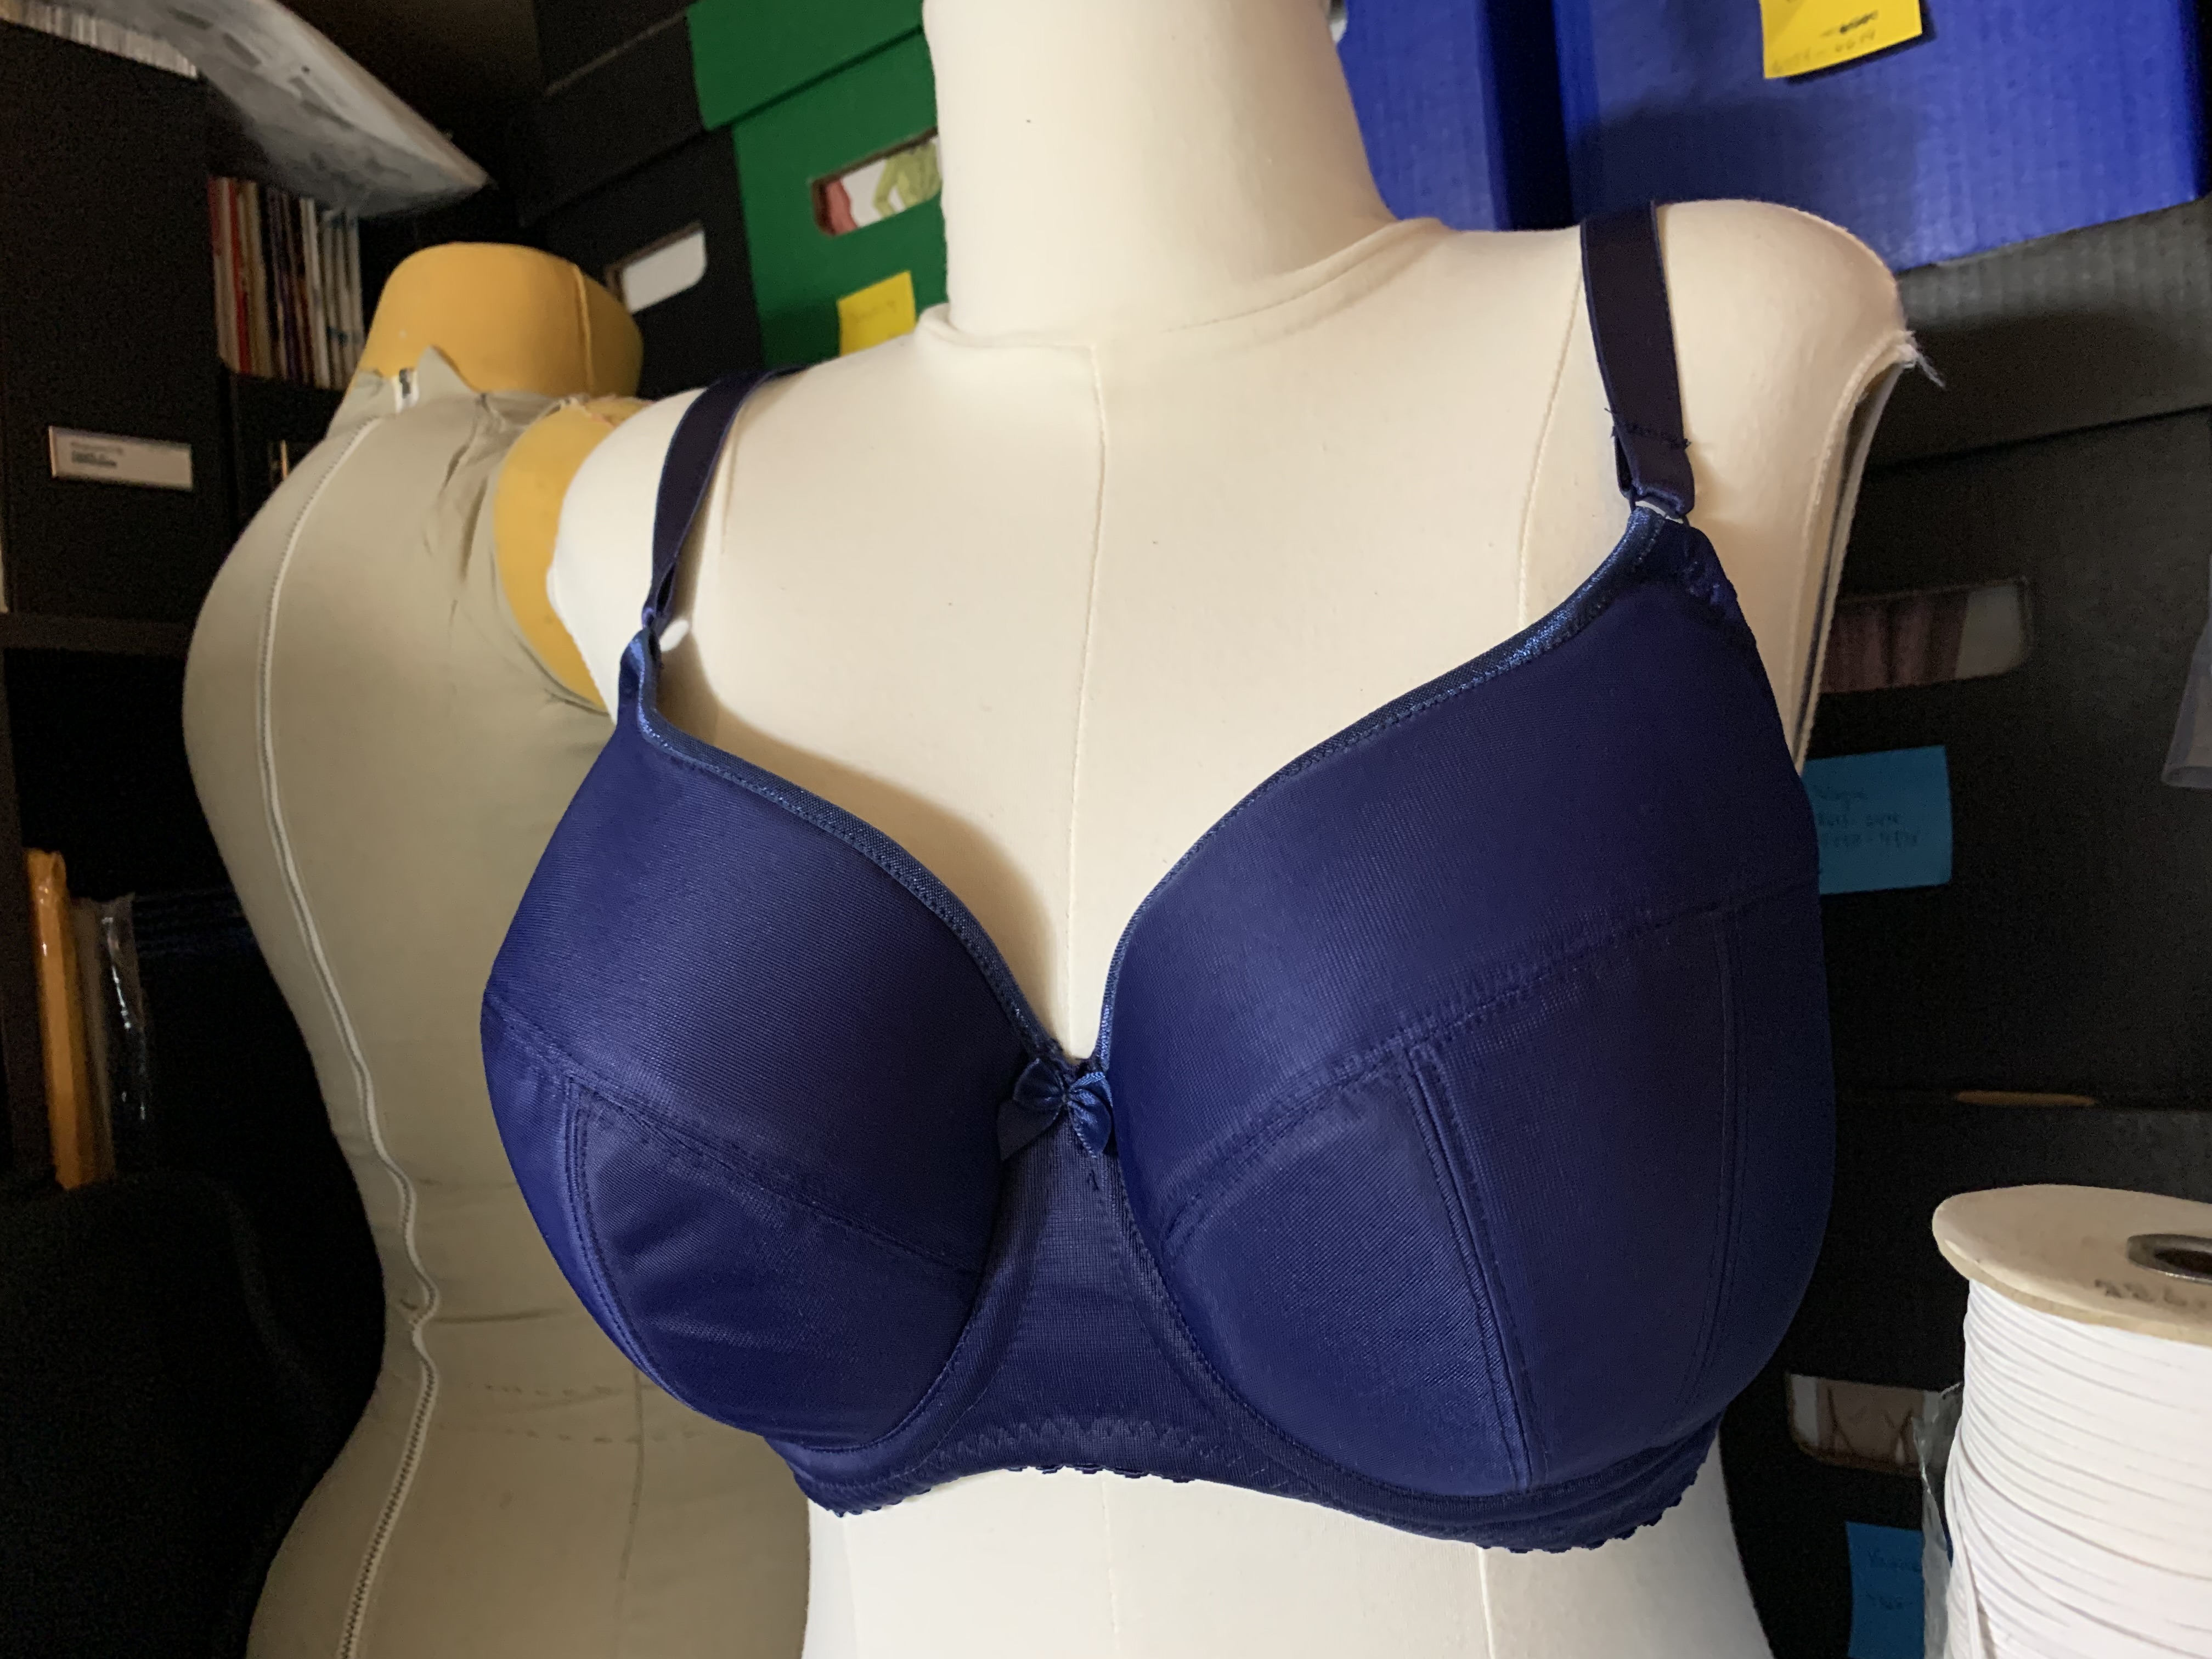 PatiJo' is Italy's first bra-fitting boutique for bras that suit